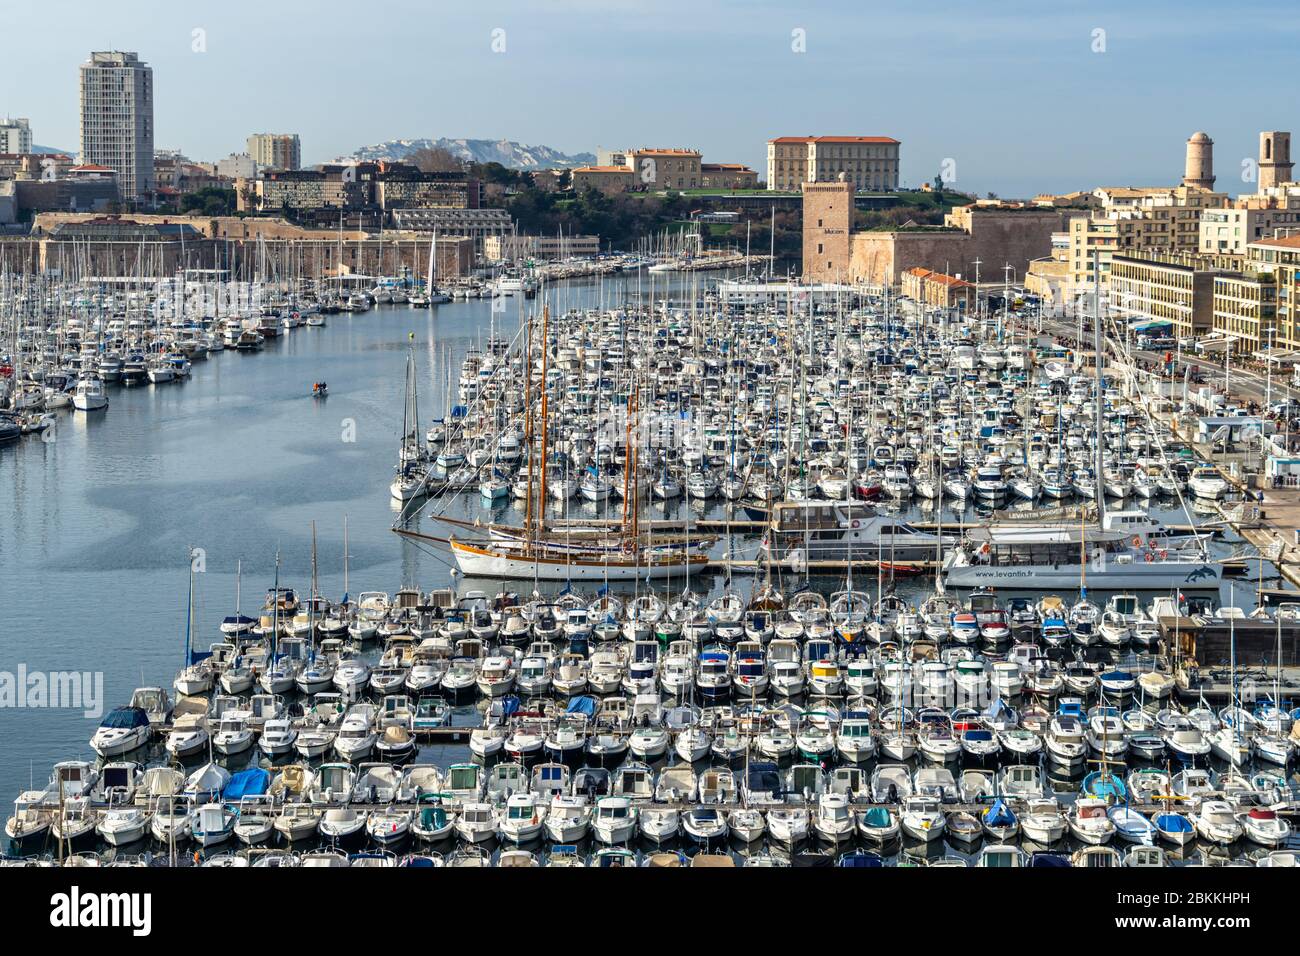 Scenic aerial view of the Vieux Port de Marseilles (old port) with Palais du Pharo in the background viewed from the Ferris wheel. Marseille, France Stock Photo